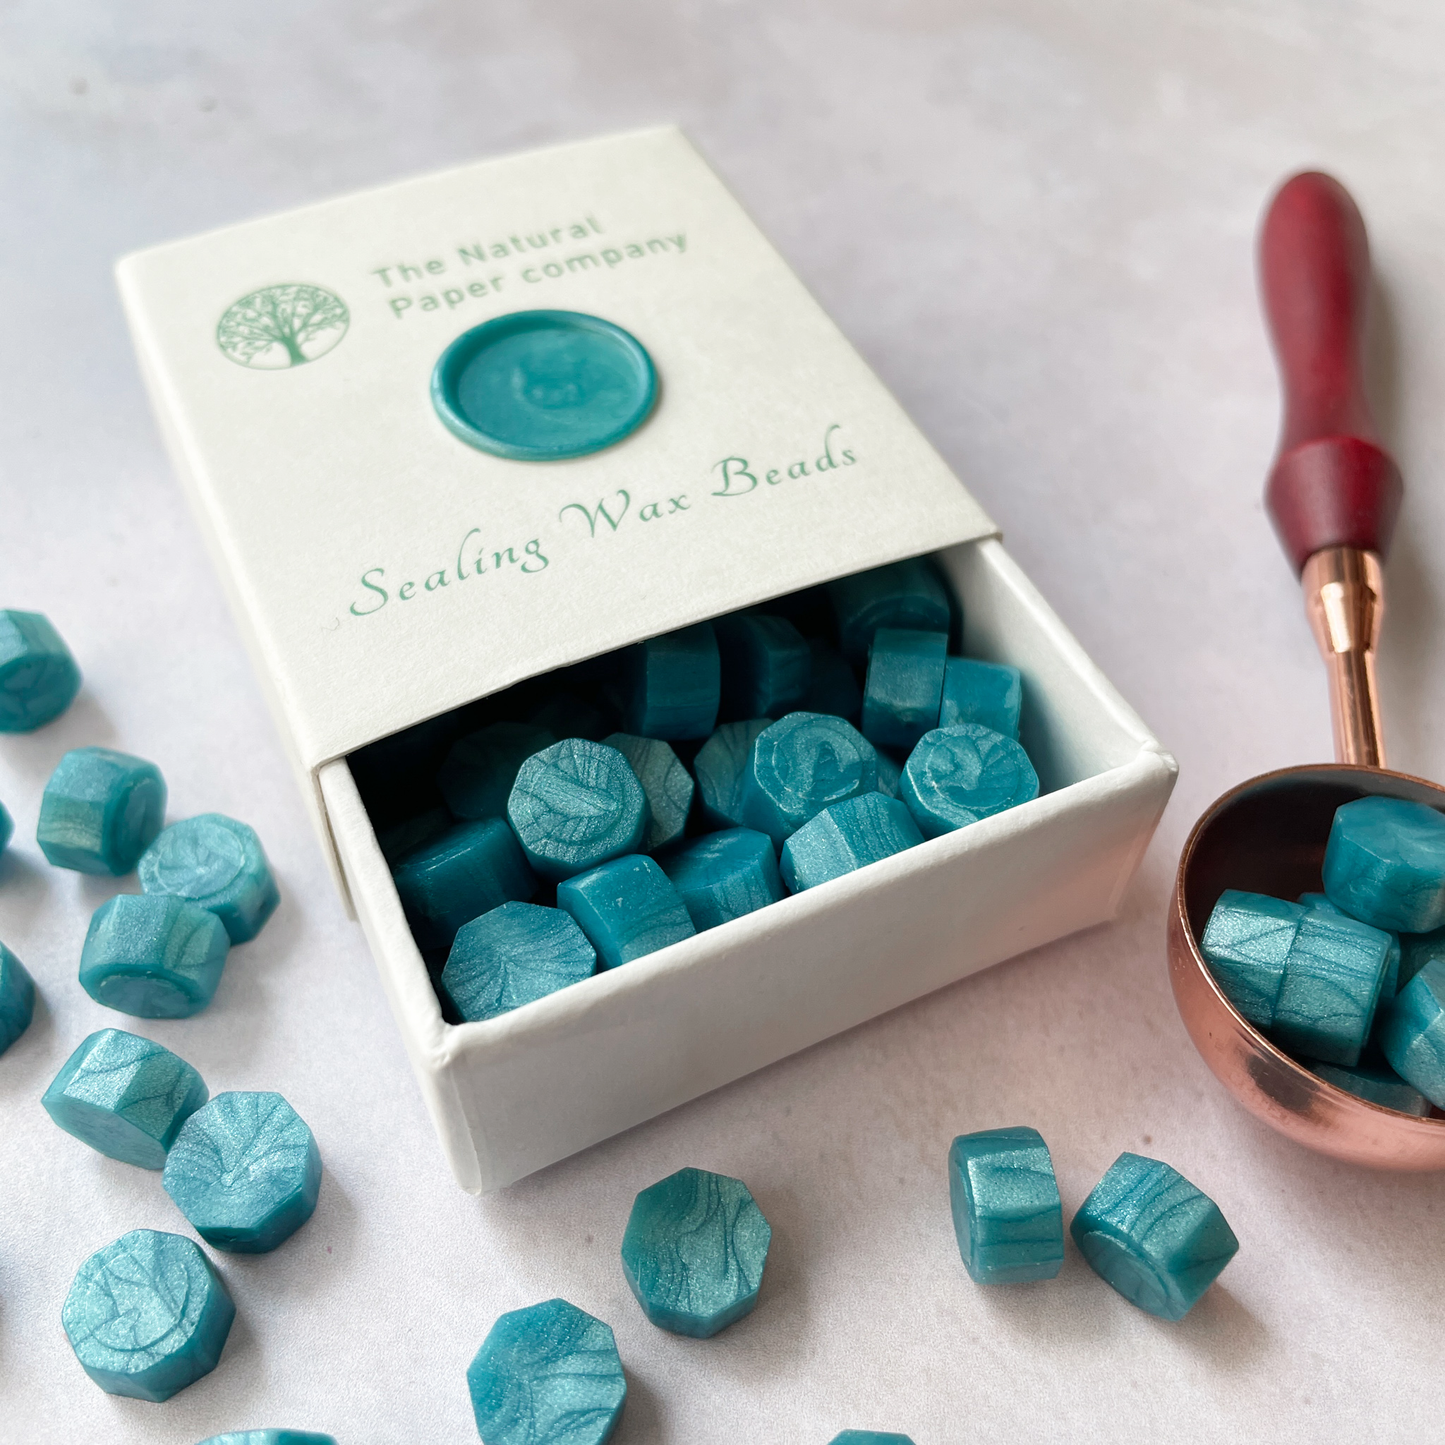 Sea green sealing wax beads to make wax seals.  Eco friendly wax without plastic, paraffin free and biodegradable.  By The Natural paper Company